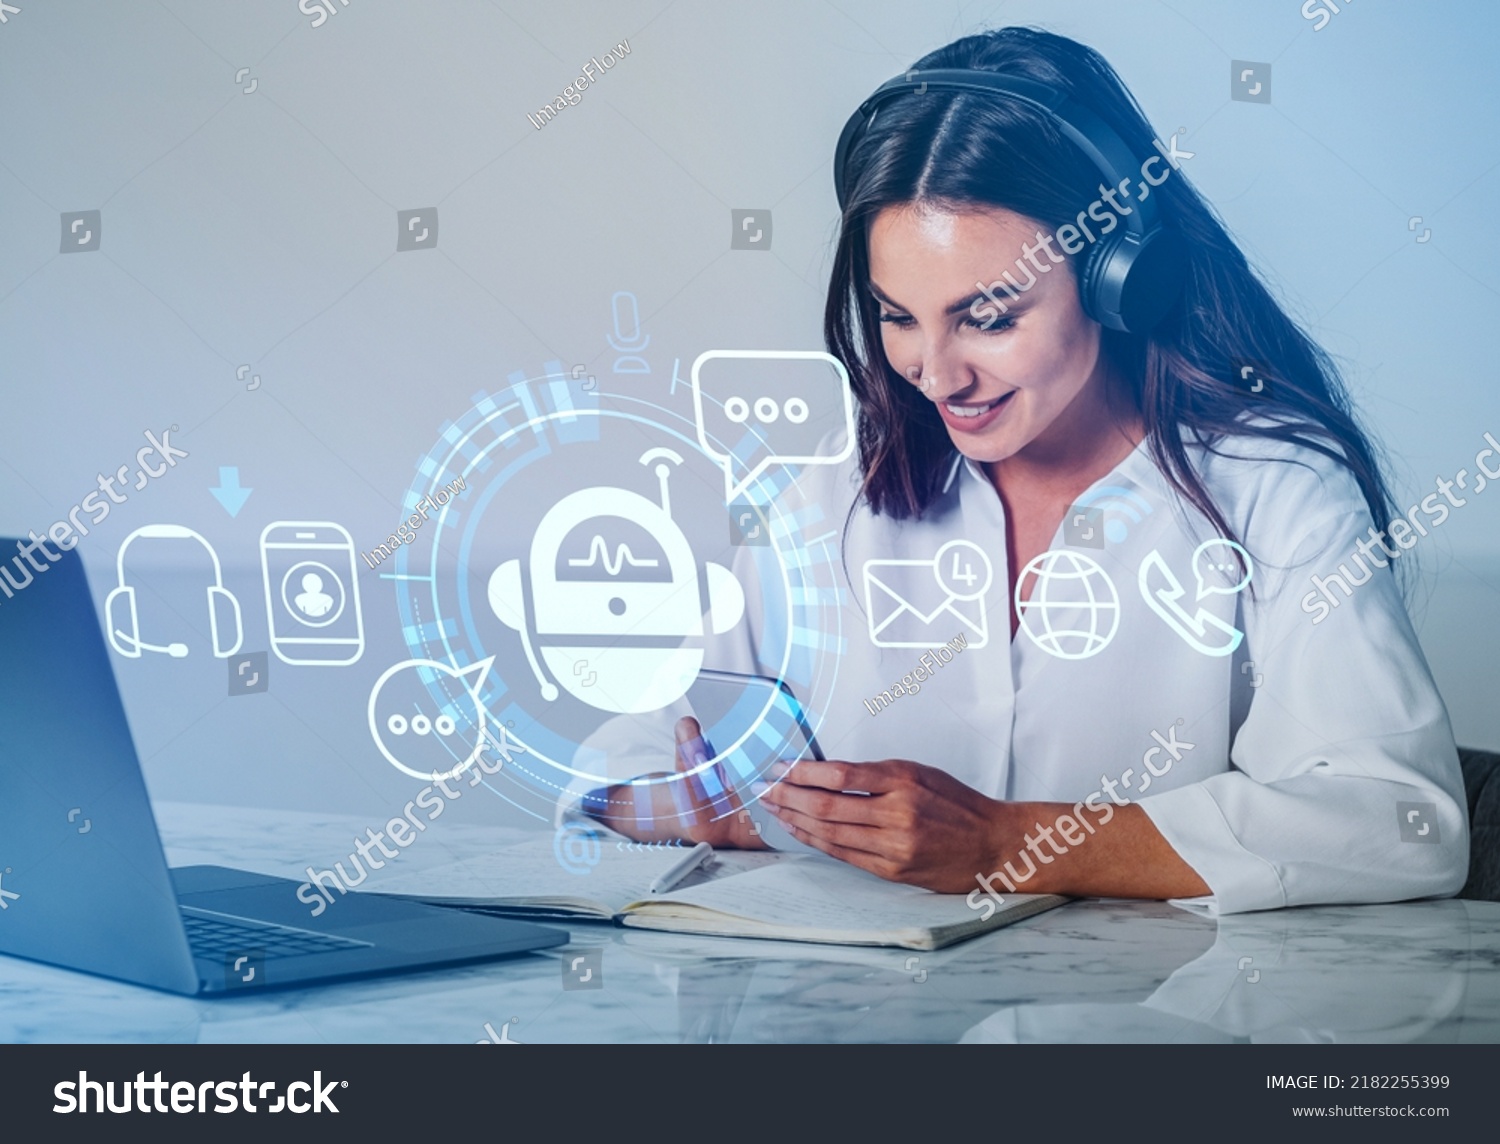 Businesswoman in headphones smiling, using phone, digital chat bot hud hologram. Office table with laptop and notebook. Concept of helpdesk #2182255399